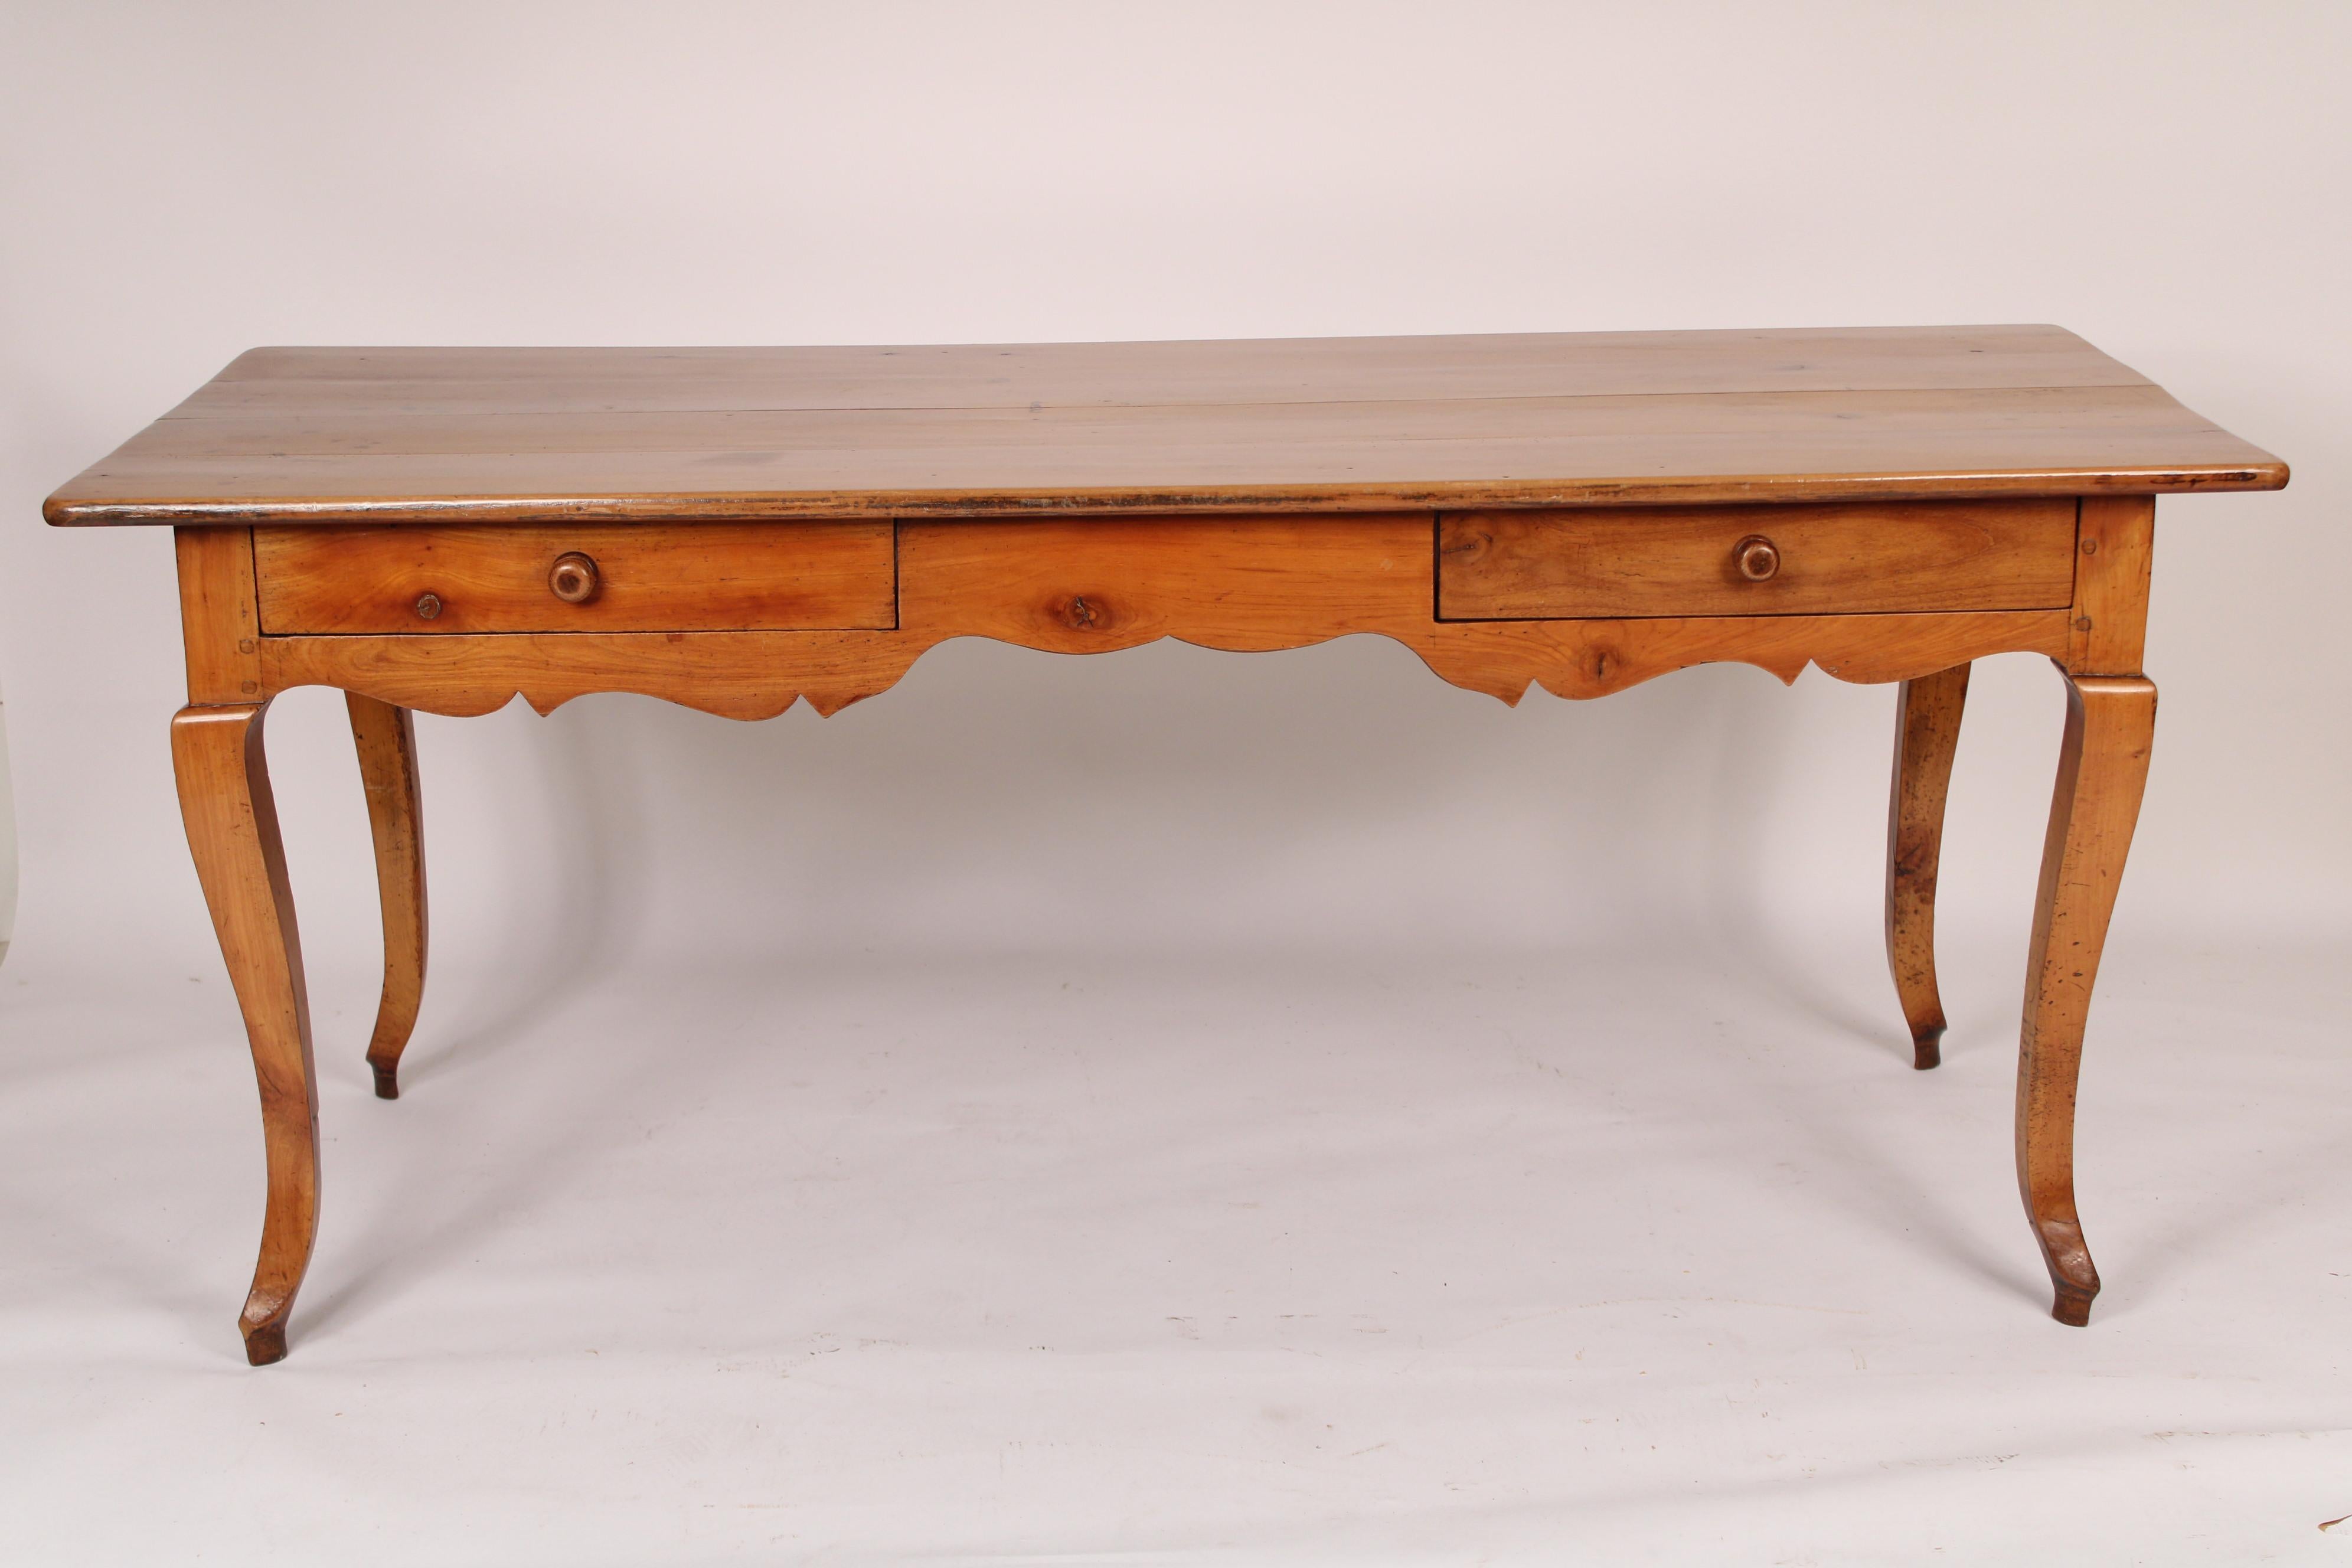 Louis XV provincial style fruit wood writing table, made from 19th century and later elements. With a 4 board rectangular fruit wood overhanging top, two frieze / desk drawers, a scalloped apron, resting on cabriole legs. Converted into a desk from